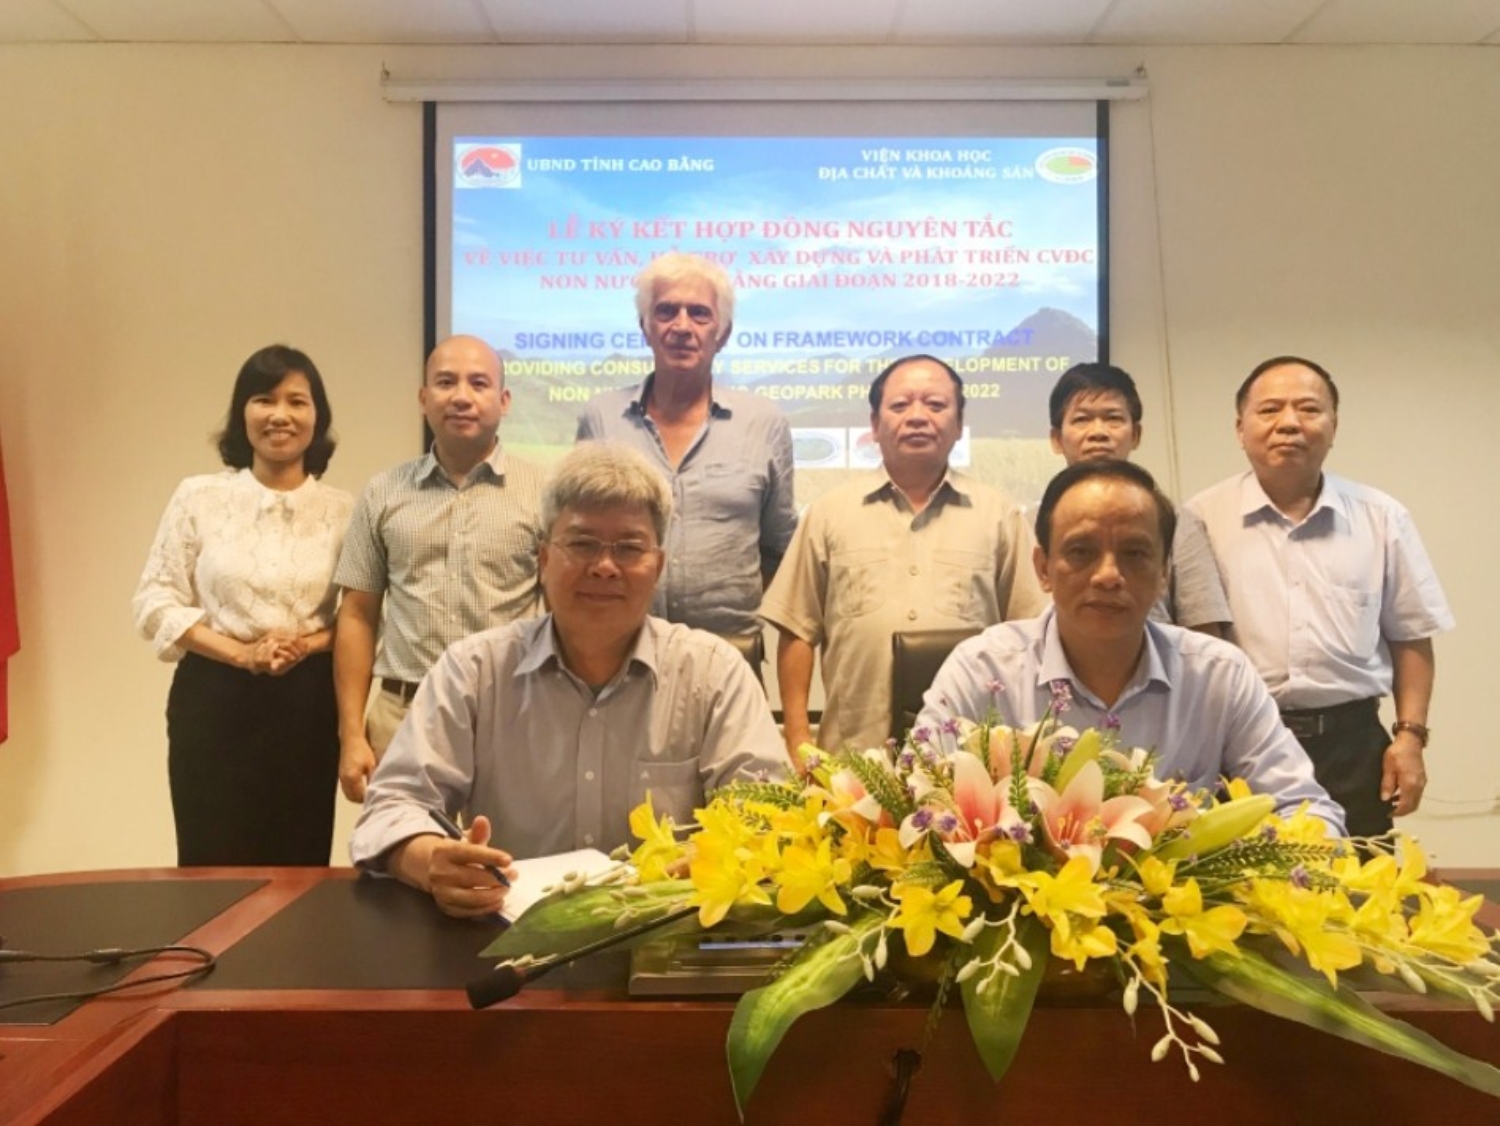 FRAMEWORK CONTRACT SIGNING CEREMONY BETWEEN CAO BANG PROVINCE AND VIETNAM INSTITUE OF GEOLOGY AND MINERAL RESOURCES.